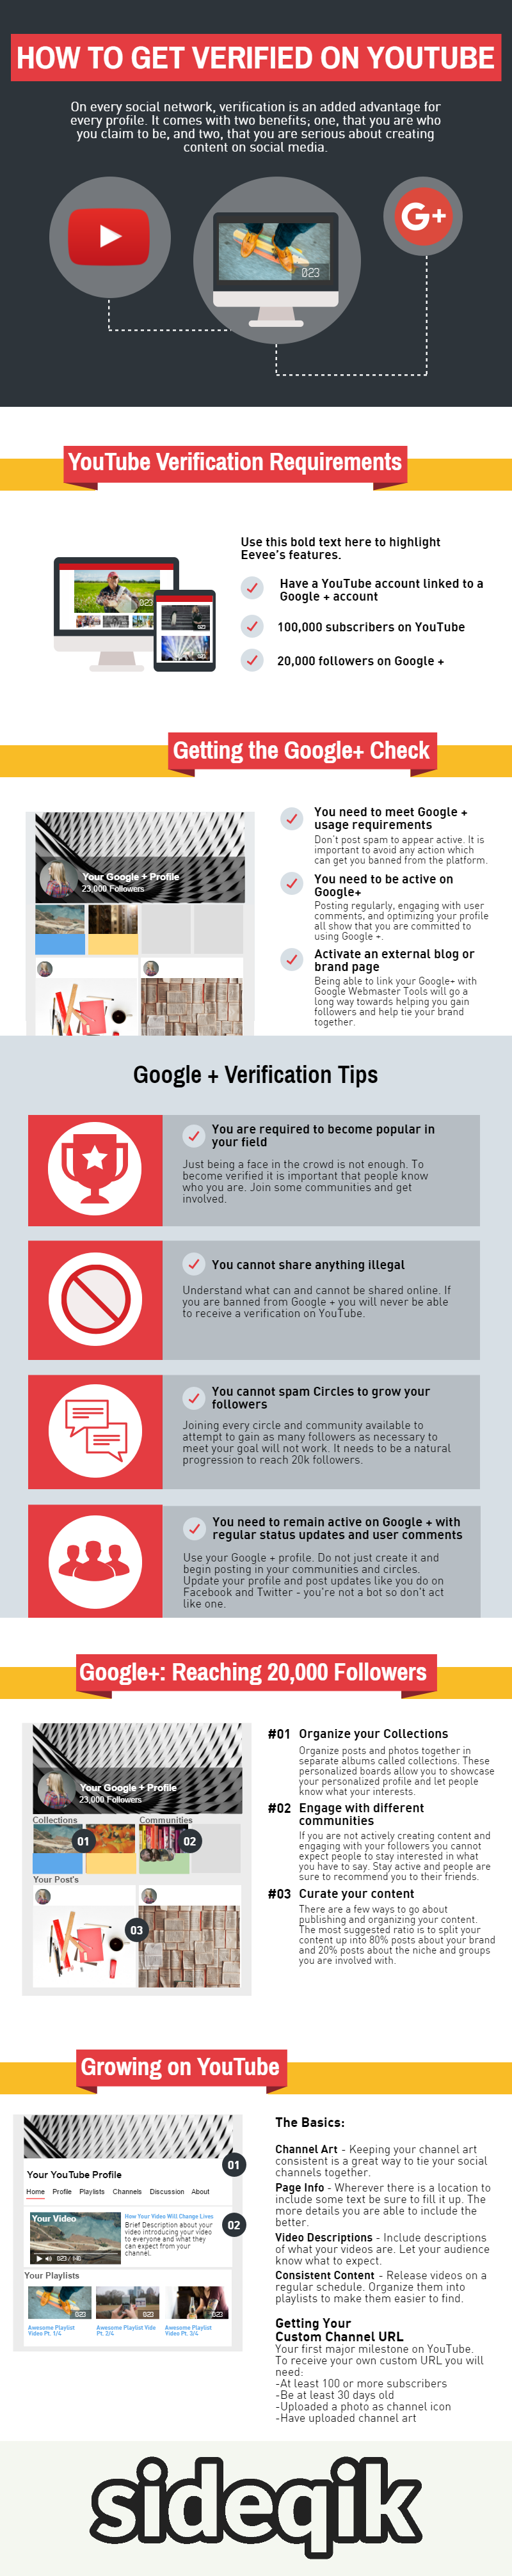 how-to-get-verified-info